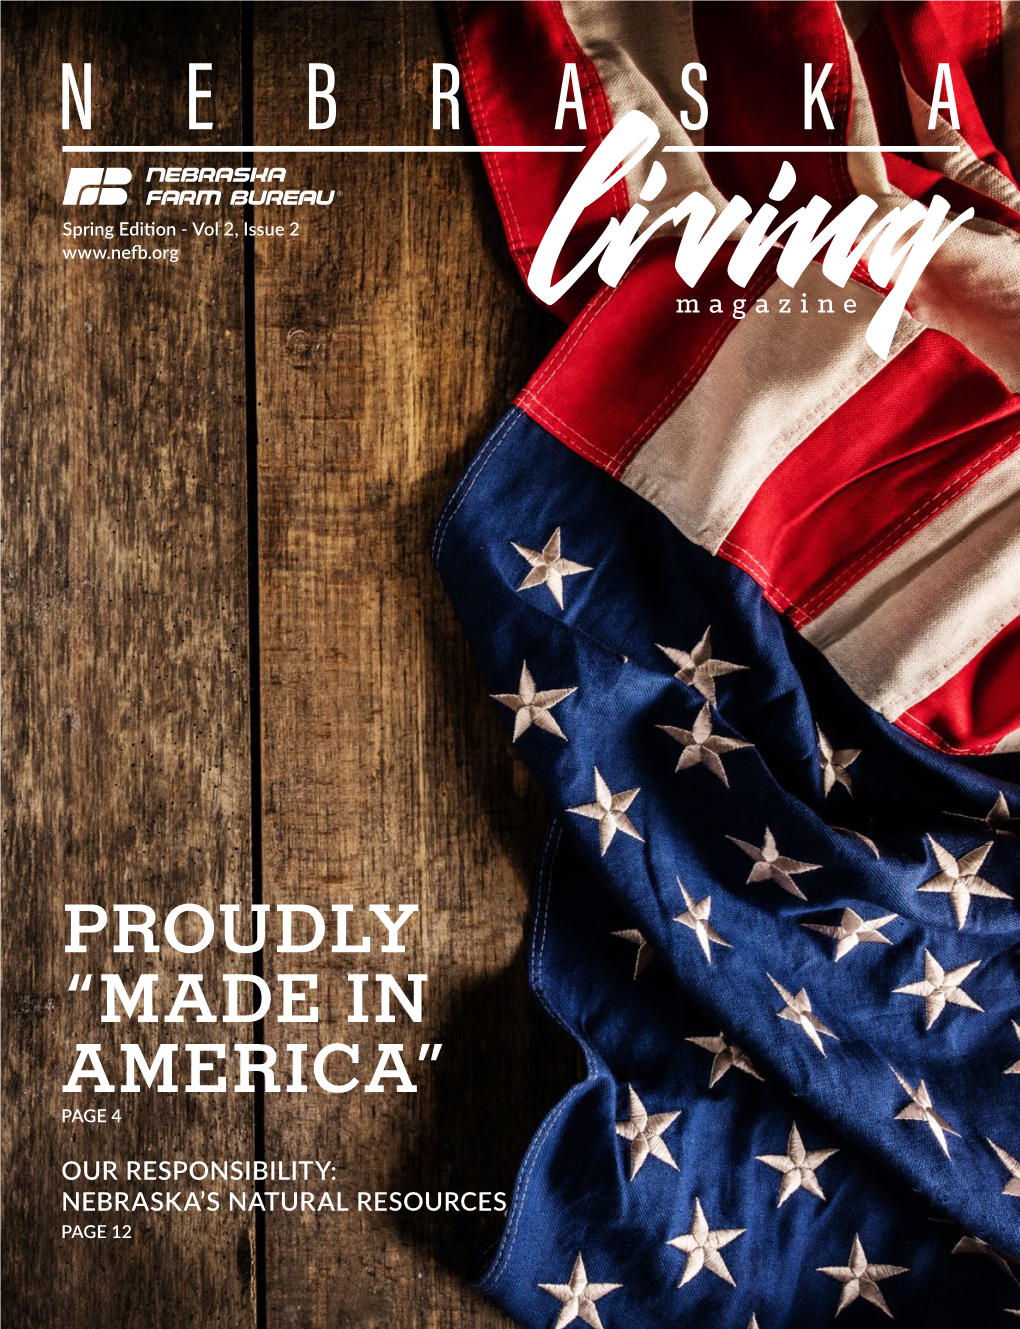 Proudly “Made in America” Page 4